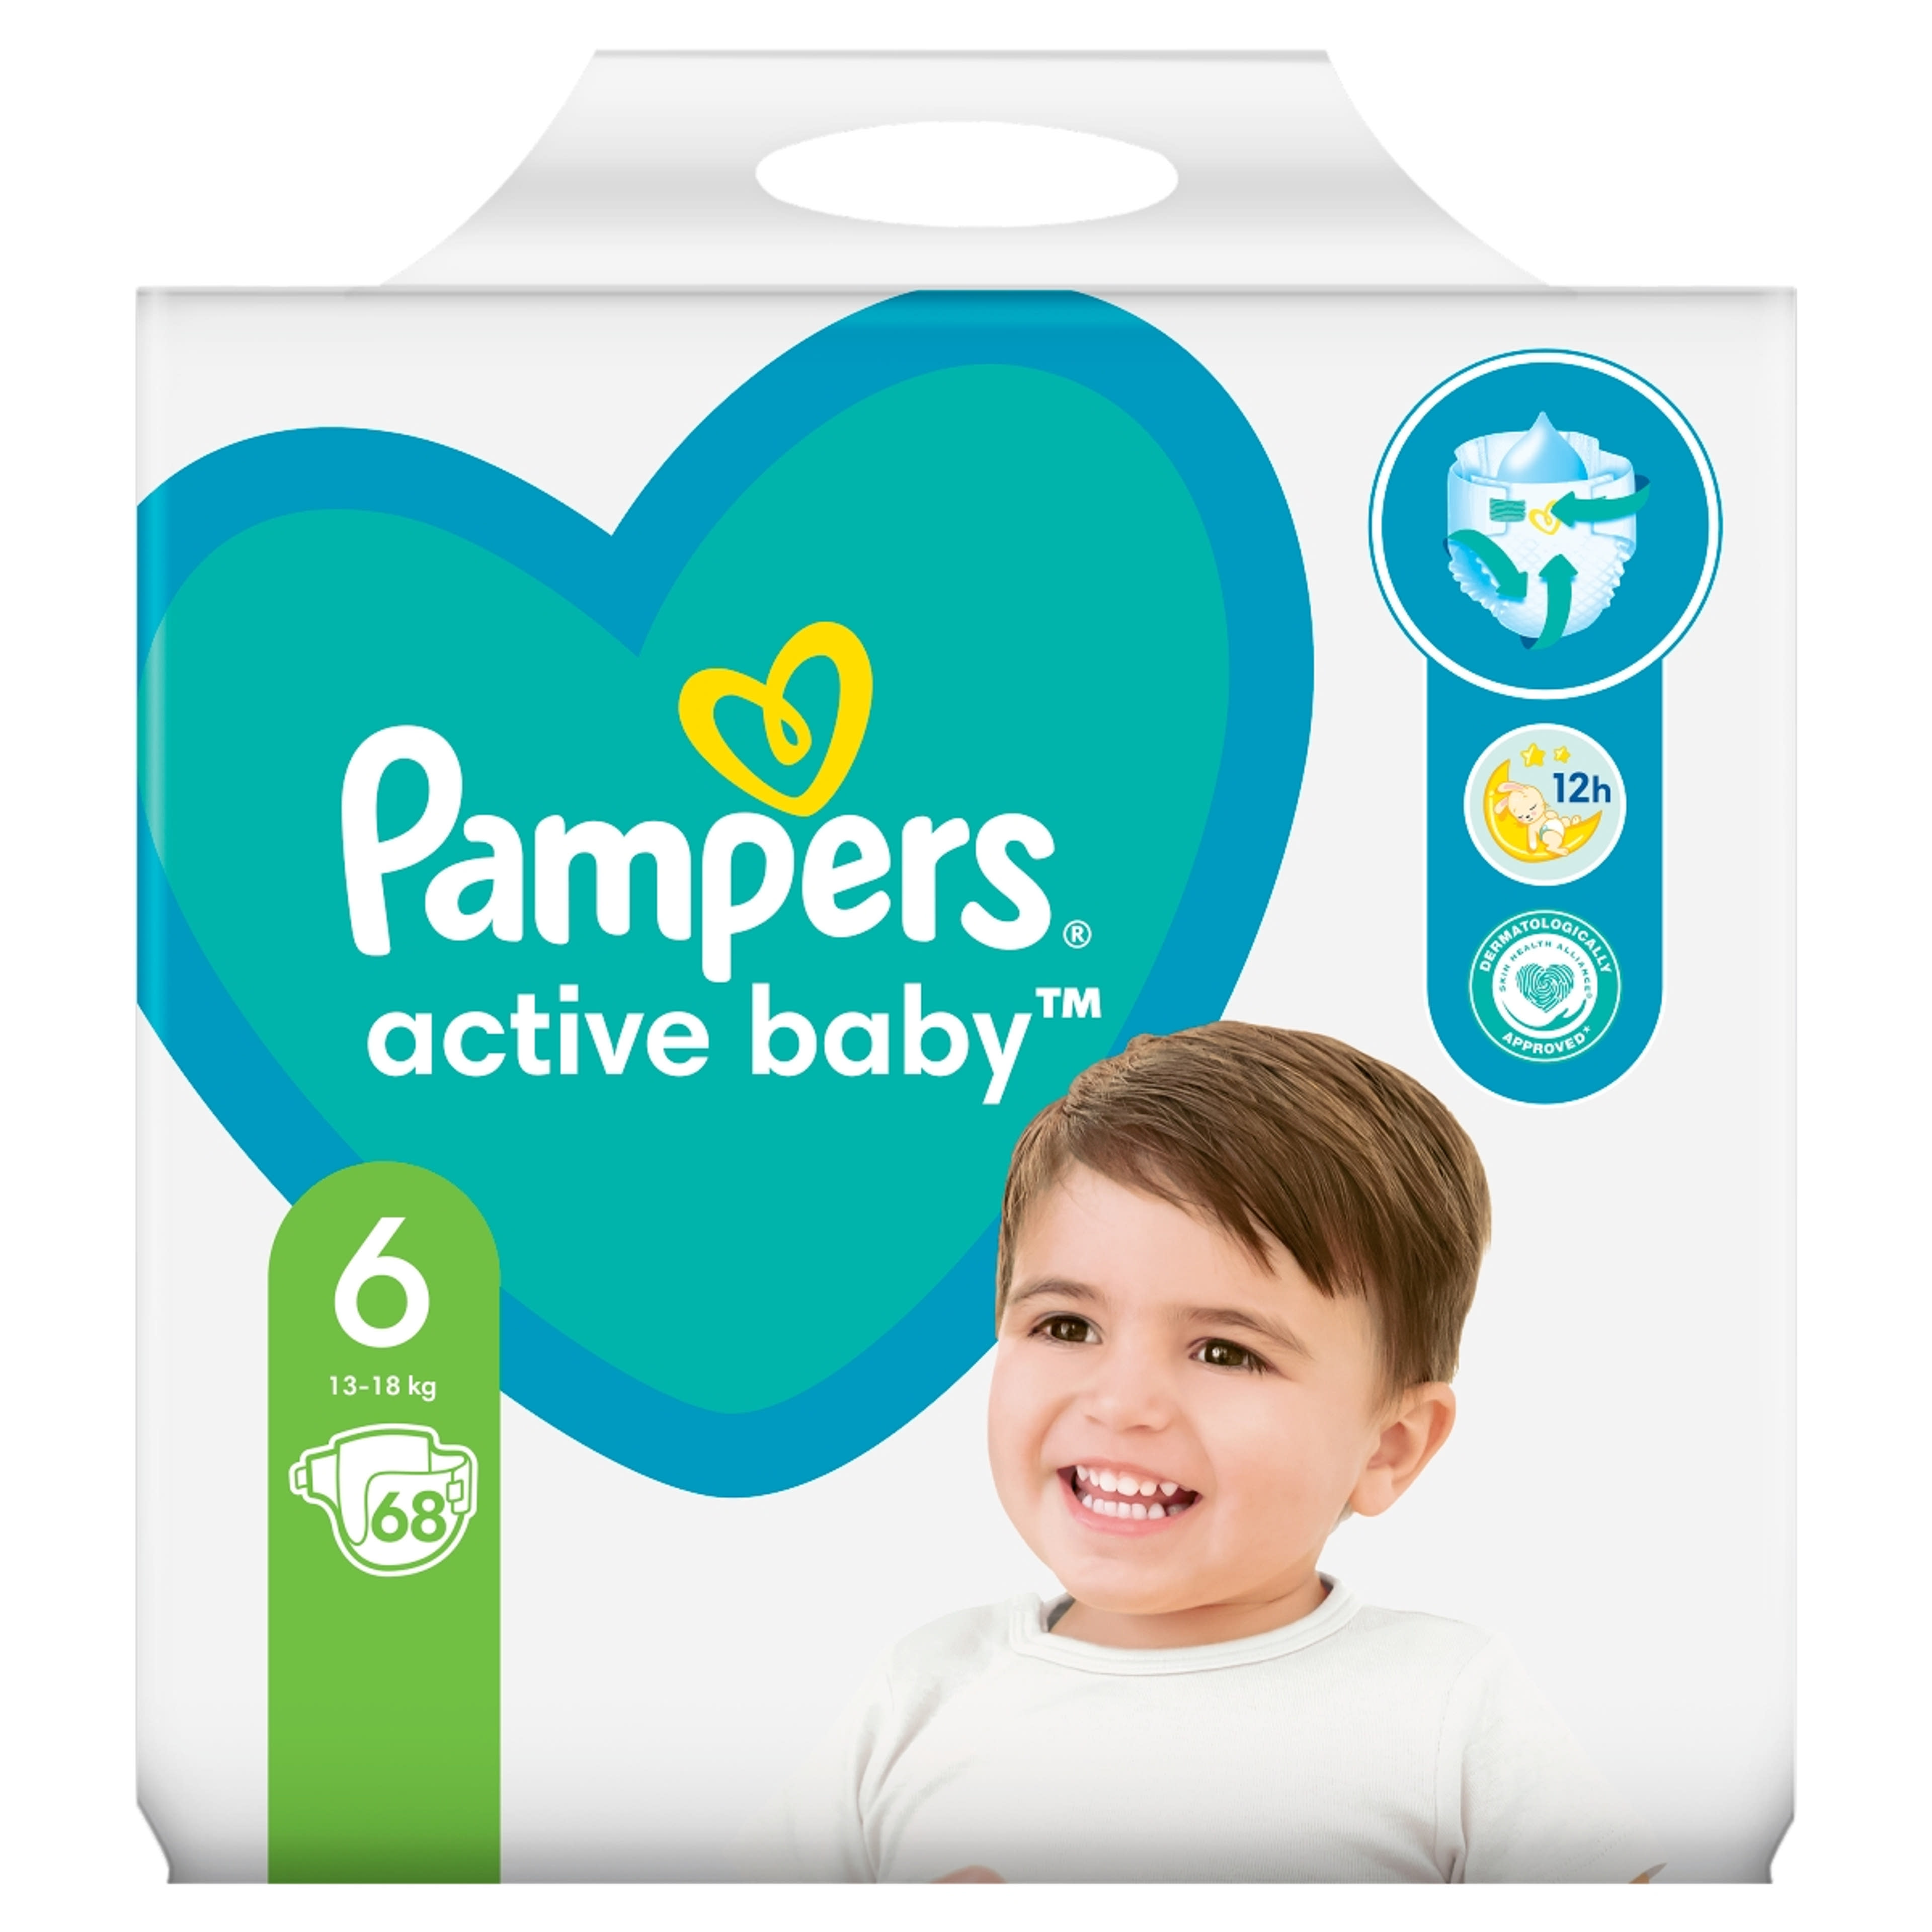 Pampers Giant Pack+ 6-os 13-18kg - 68 db